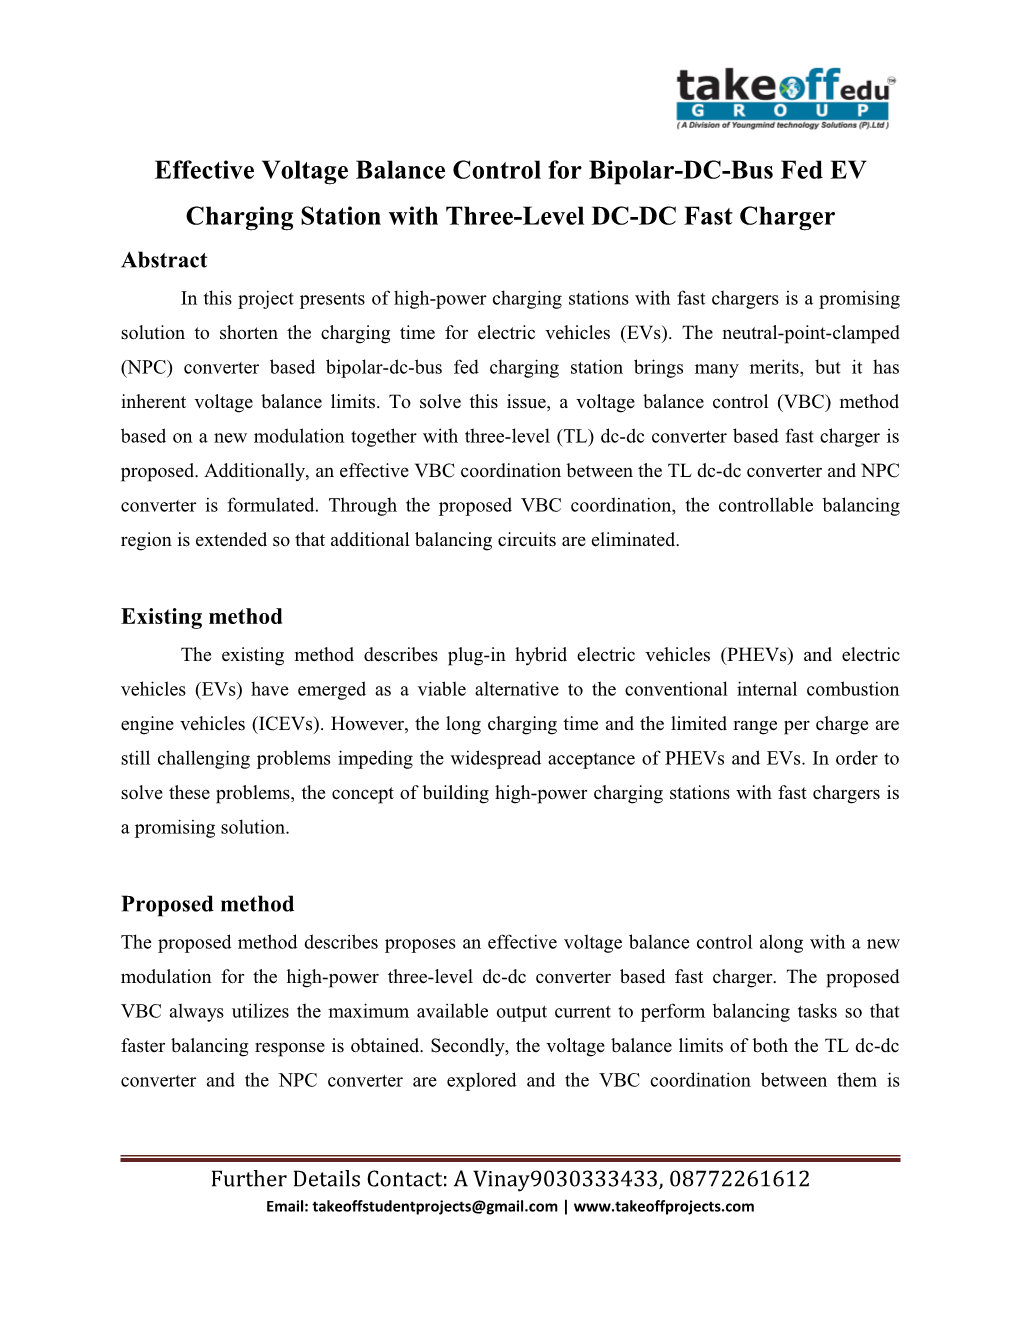 Effective Voltage Balance Control for Bipolar-DC-Bus Fed EV Charging Station with Three-Level